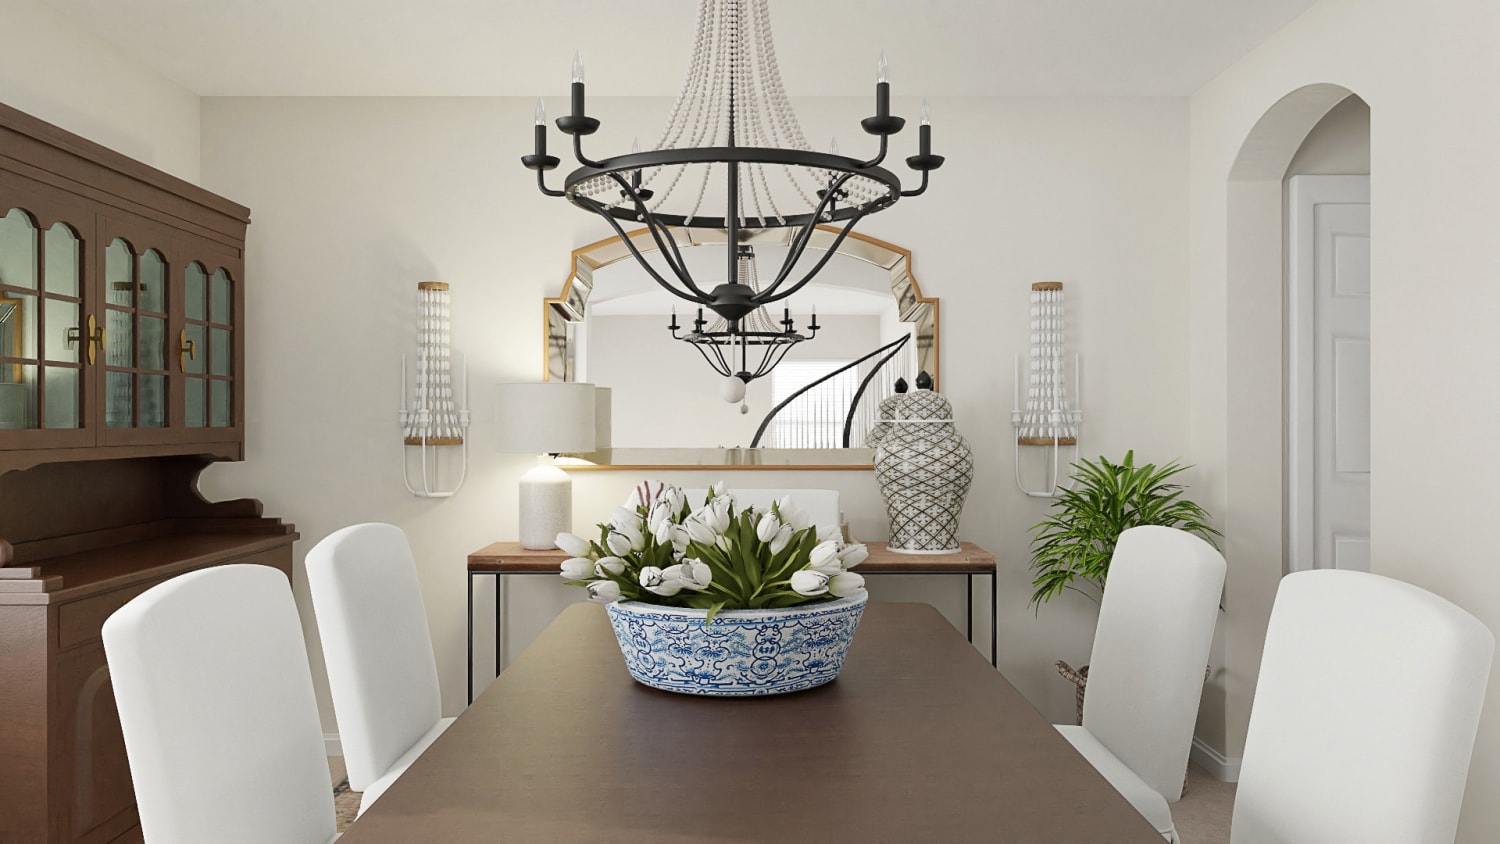 Upgrade Your Dining Experience With These Simple Dining Room Ideas